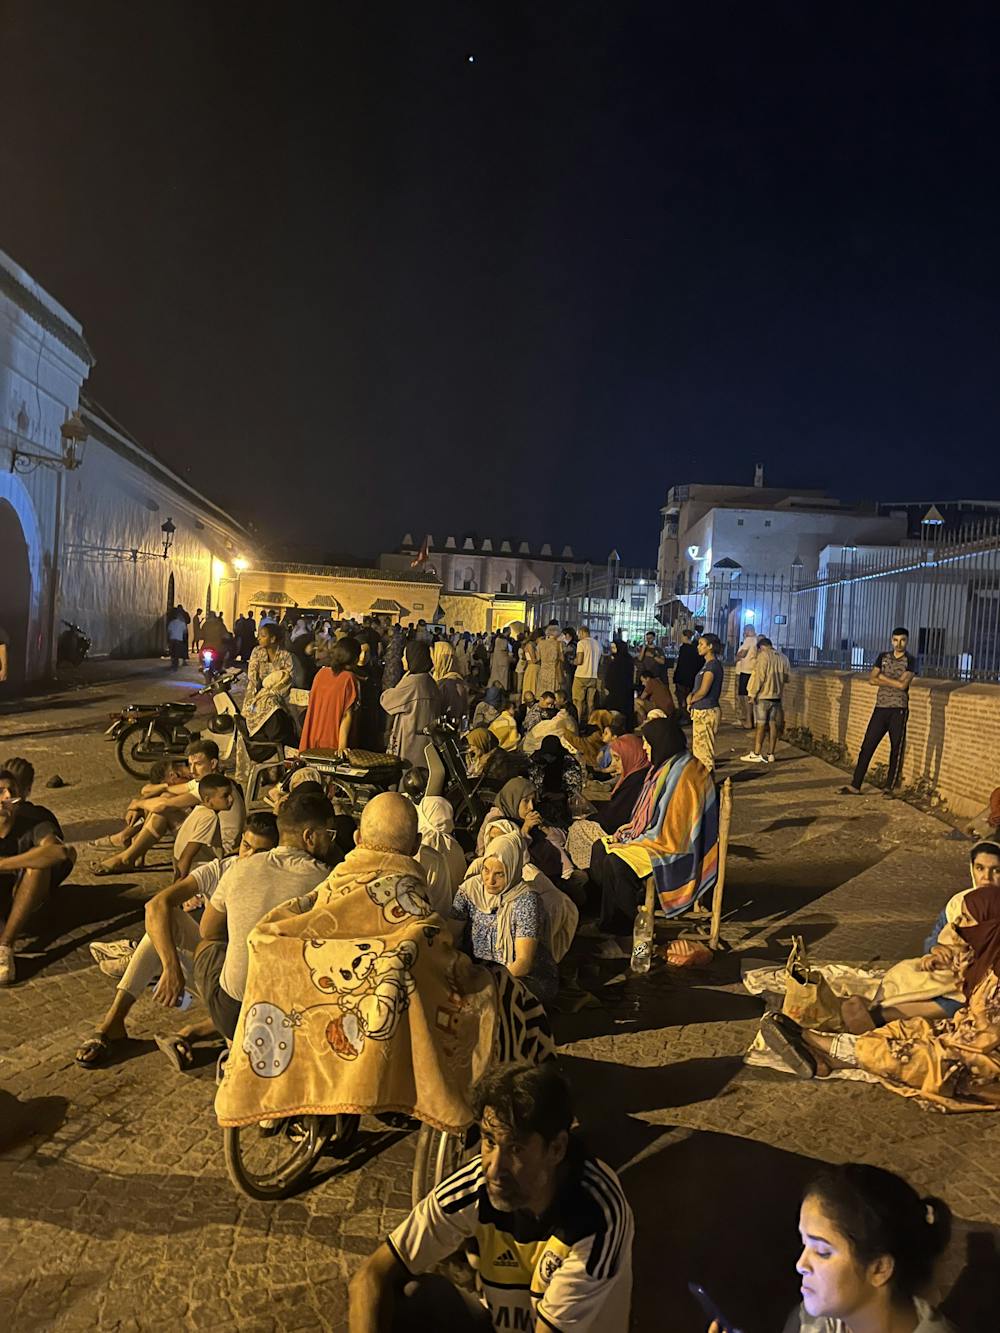 People seek refuge the square in front of Ibn Yusuf Mosque in the old city of Marrakech, Morocco after a 6.8 magnitude earthquake hit on Sept. 8.